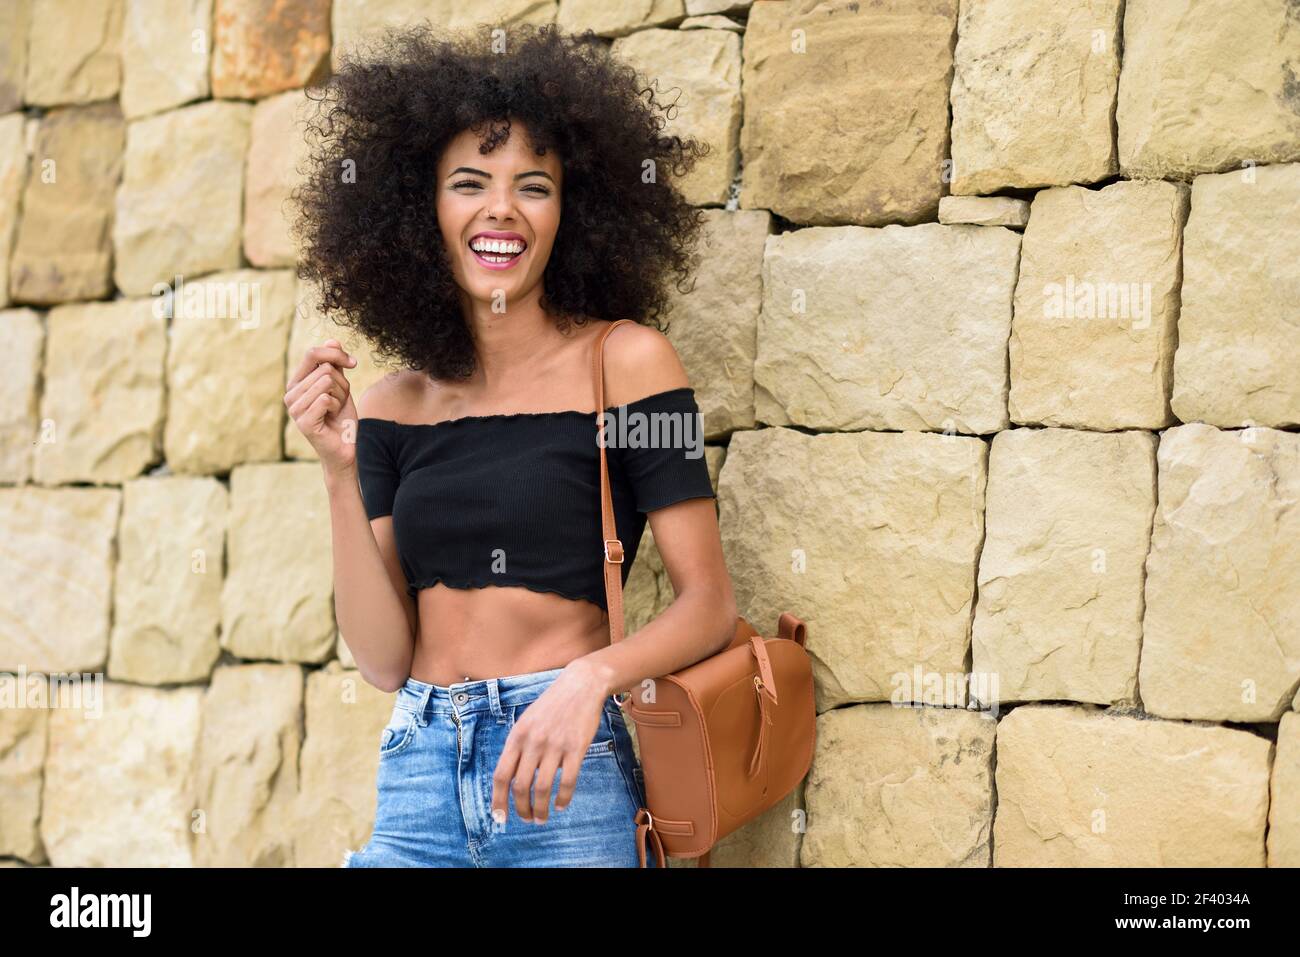 Happy mixed woman with afro hair laughing outdoors. Female wearing casual clothes in urban background. Lifestyle concept Stock Photo